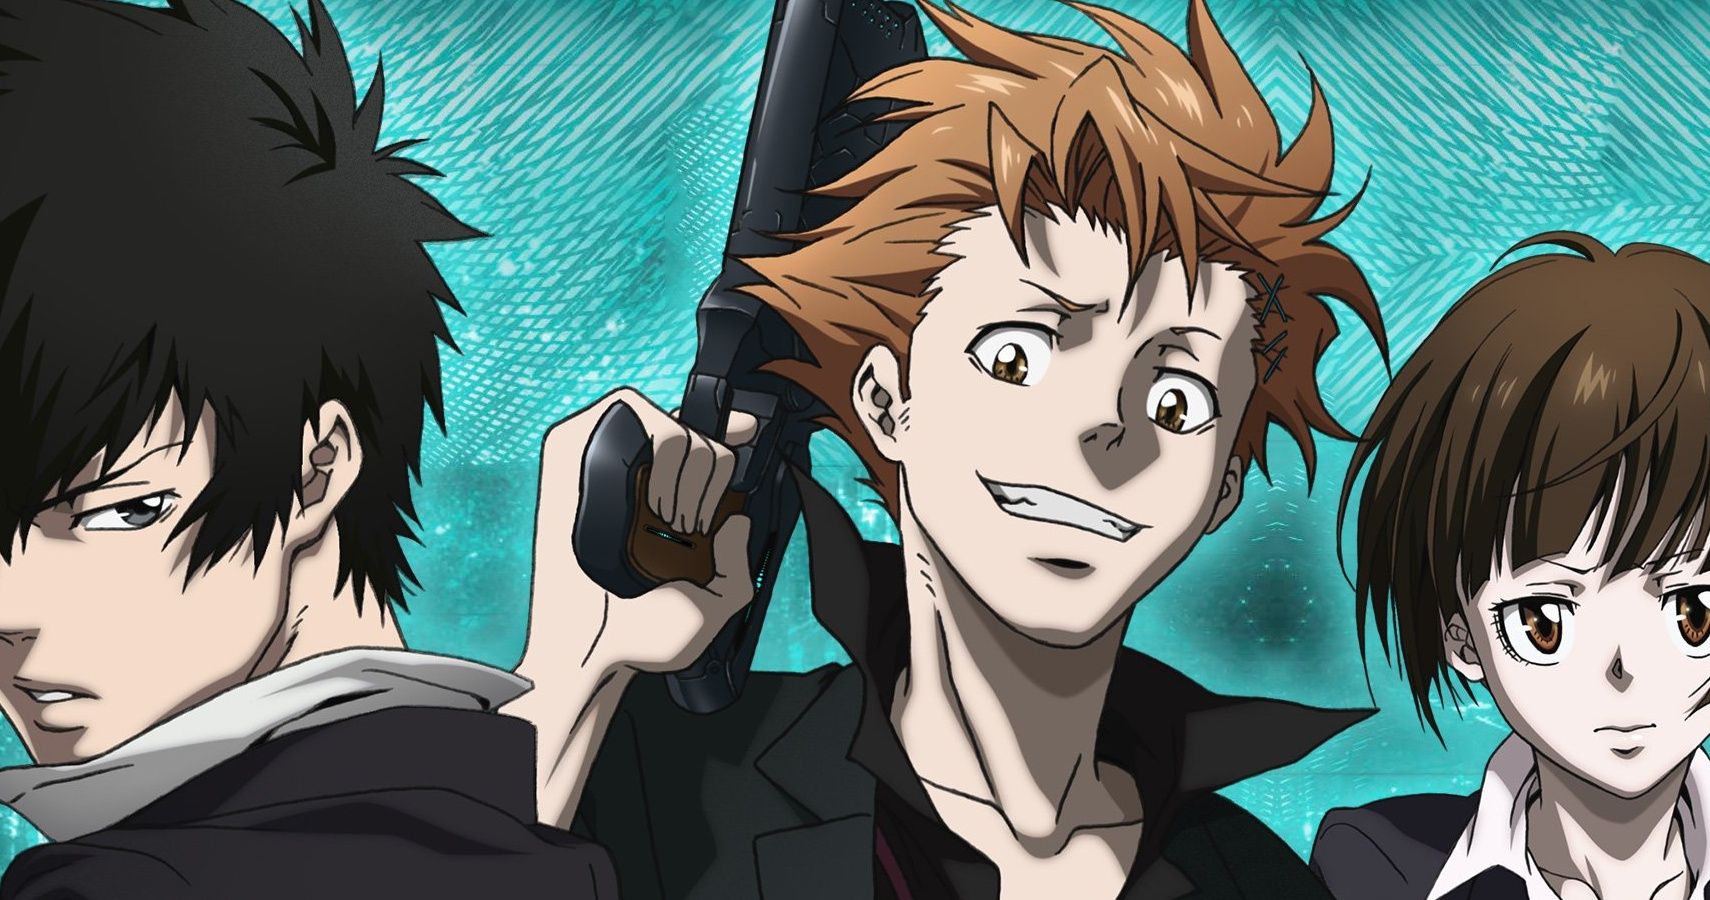 Psycho-Pass: 5 Things From This Future That We Want (& 5 That We Don't)